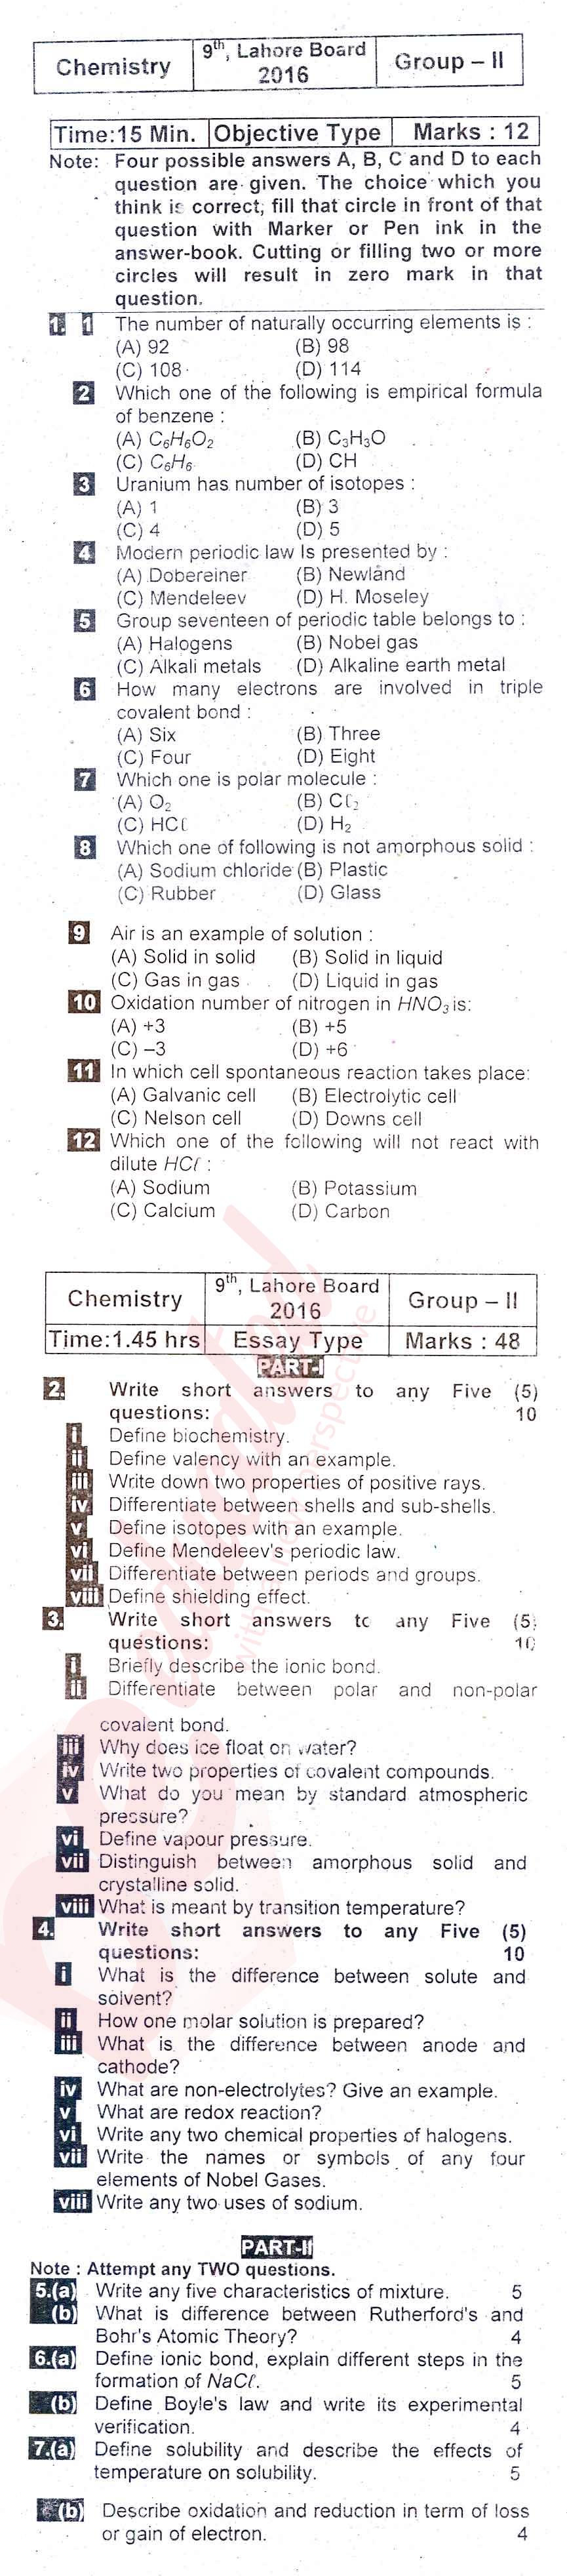 Chemistry 9th English Medium Past Paper Group 2 BISE Lahore 2016